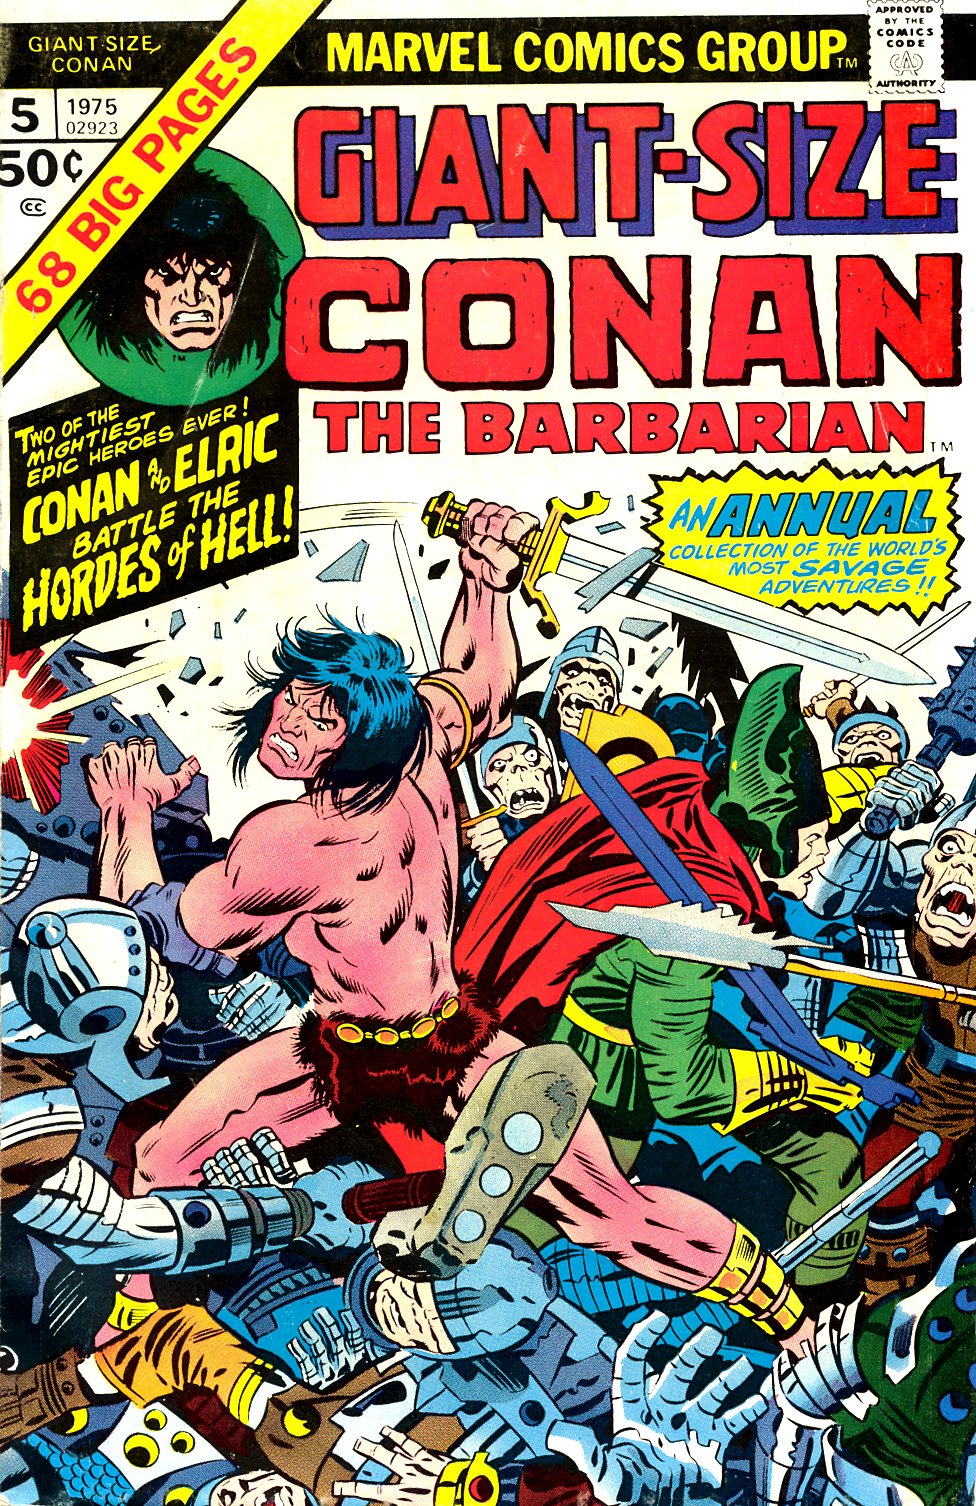 Read online Giant-Size Conan comic -  Issue #5 - 1